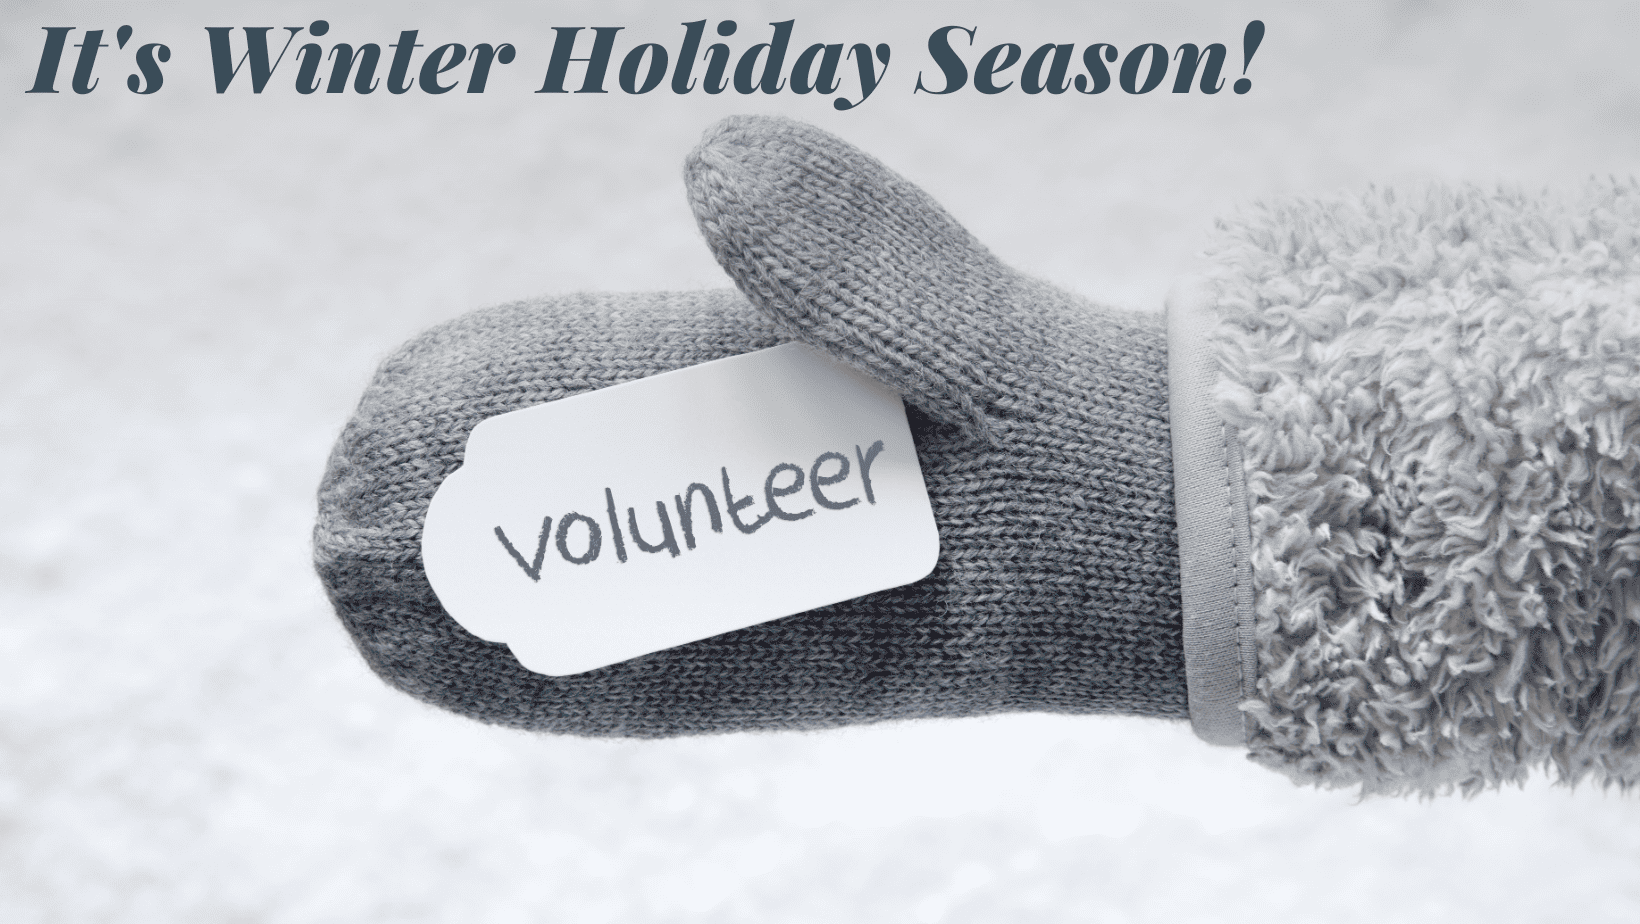 Can You Volunteer for a Winter Event?